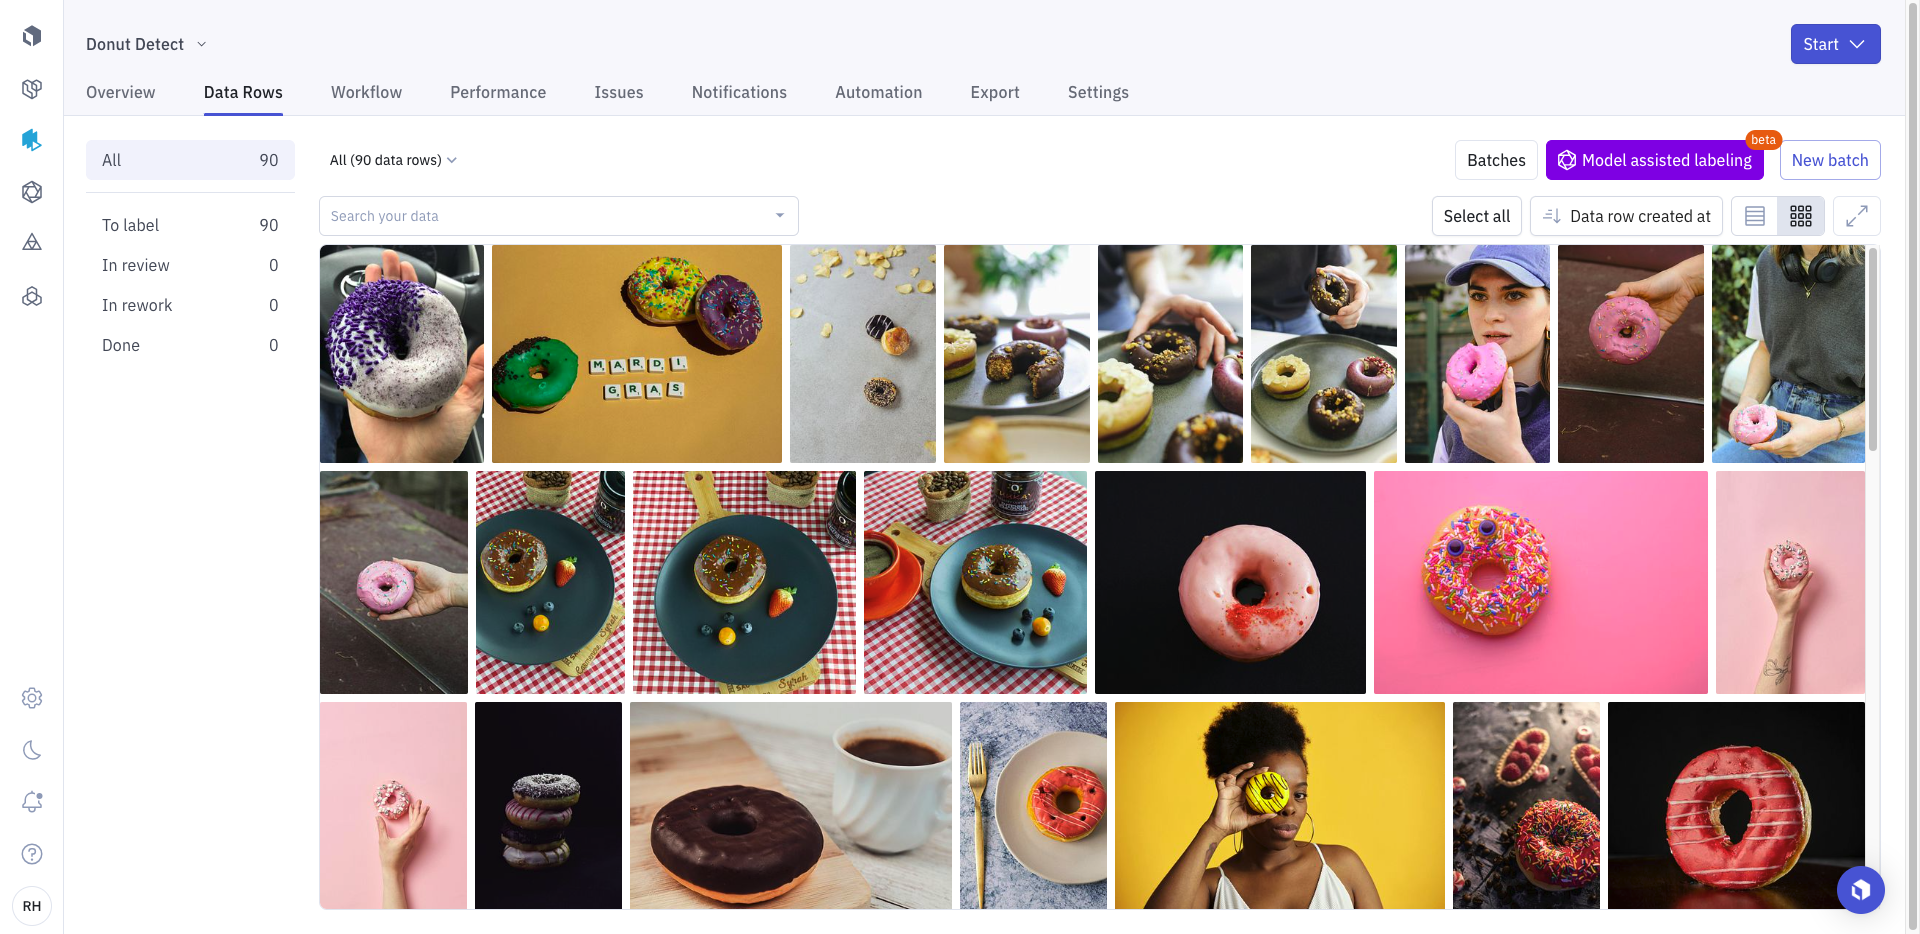 You are building an Object Detection model that can recognize donuts! 

You have thousands of images. 

Ready to mass label in just a few clicks?